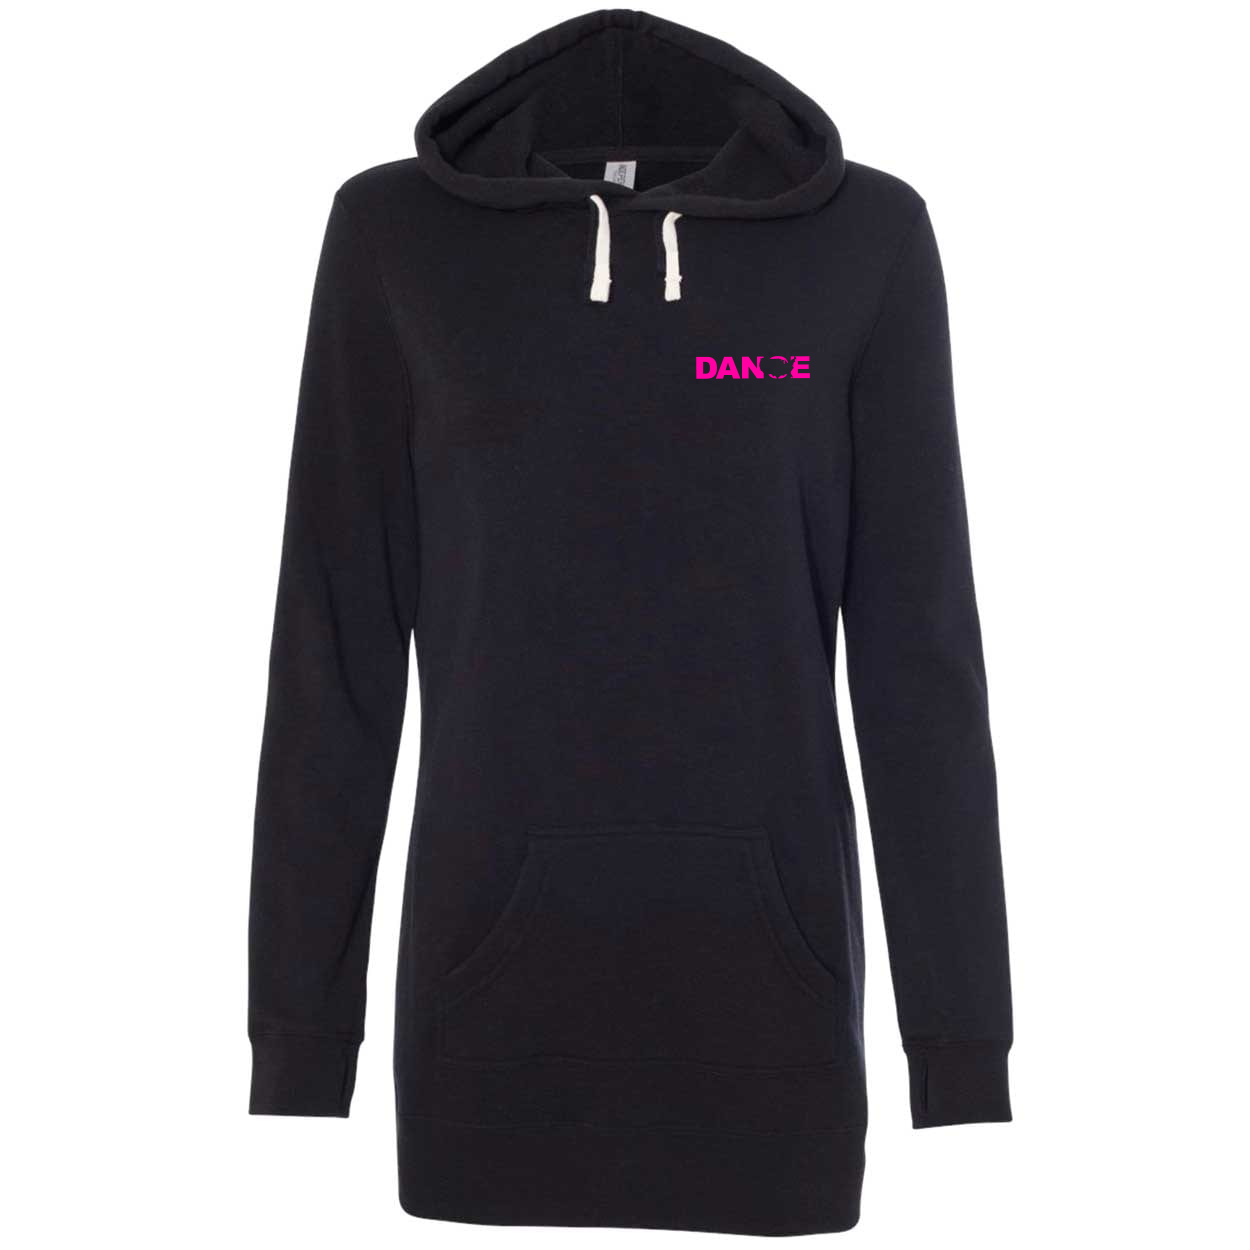 Dance United States Night Out Womens Pullover Hooded Sweatshirt Dress Black (Pink Logo)